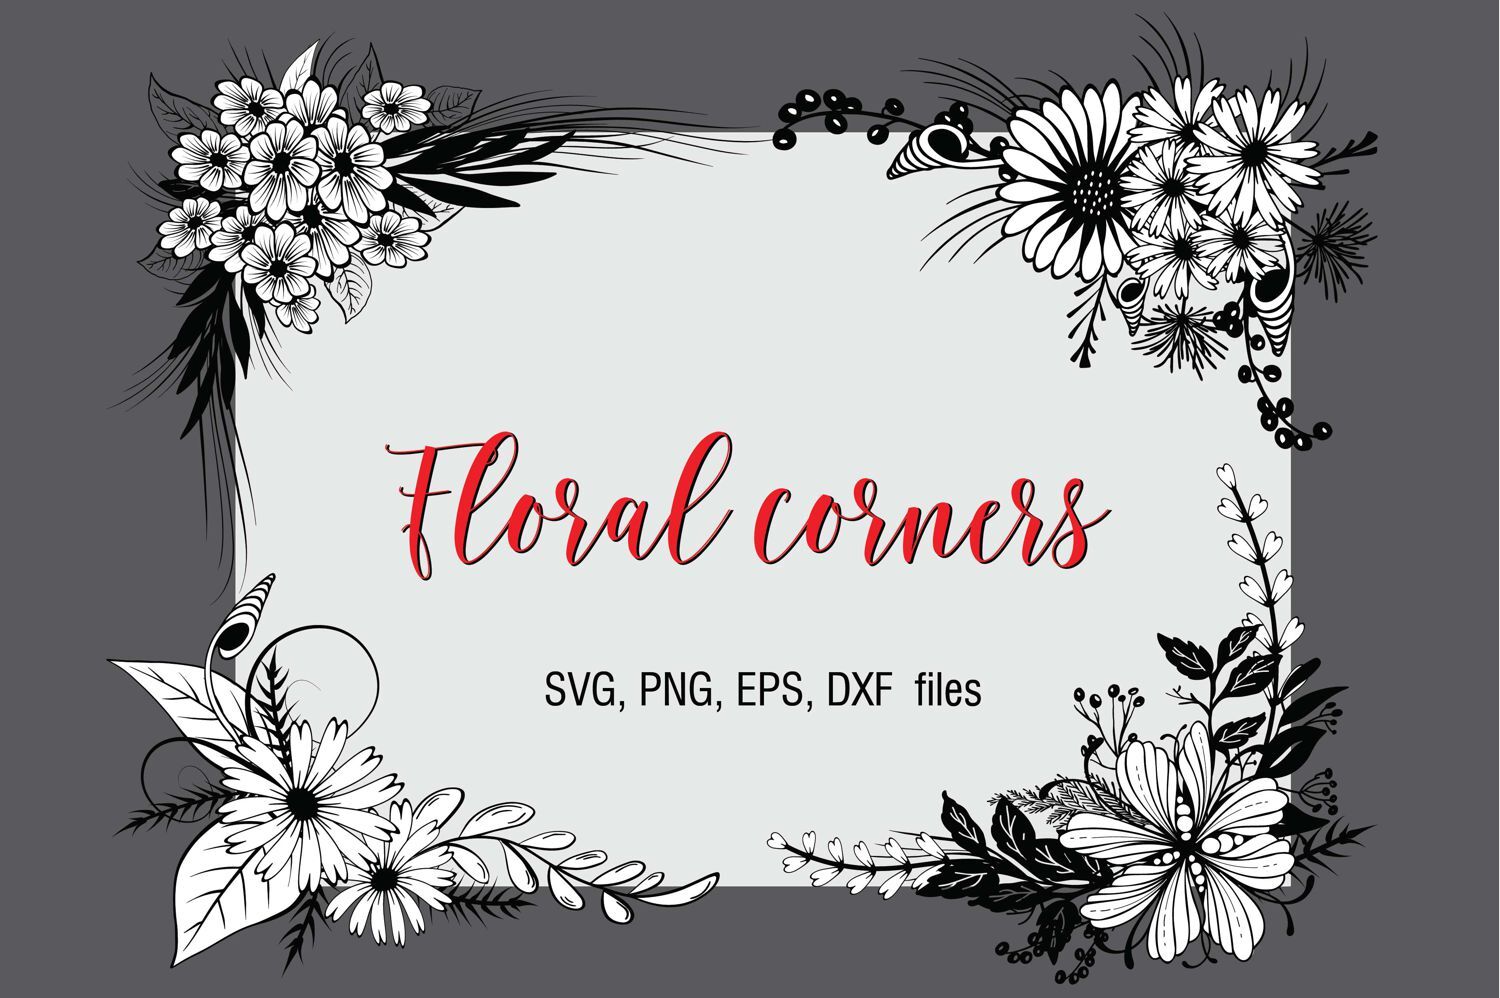 Download Floral Corners Pack Svg Eps Png Dxf Files By Digitaltypefaces Thehungryjpeg Com